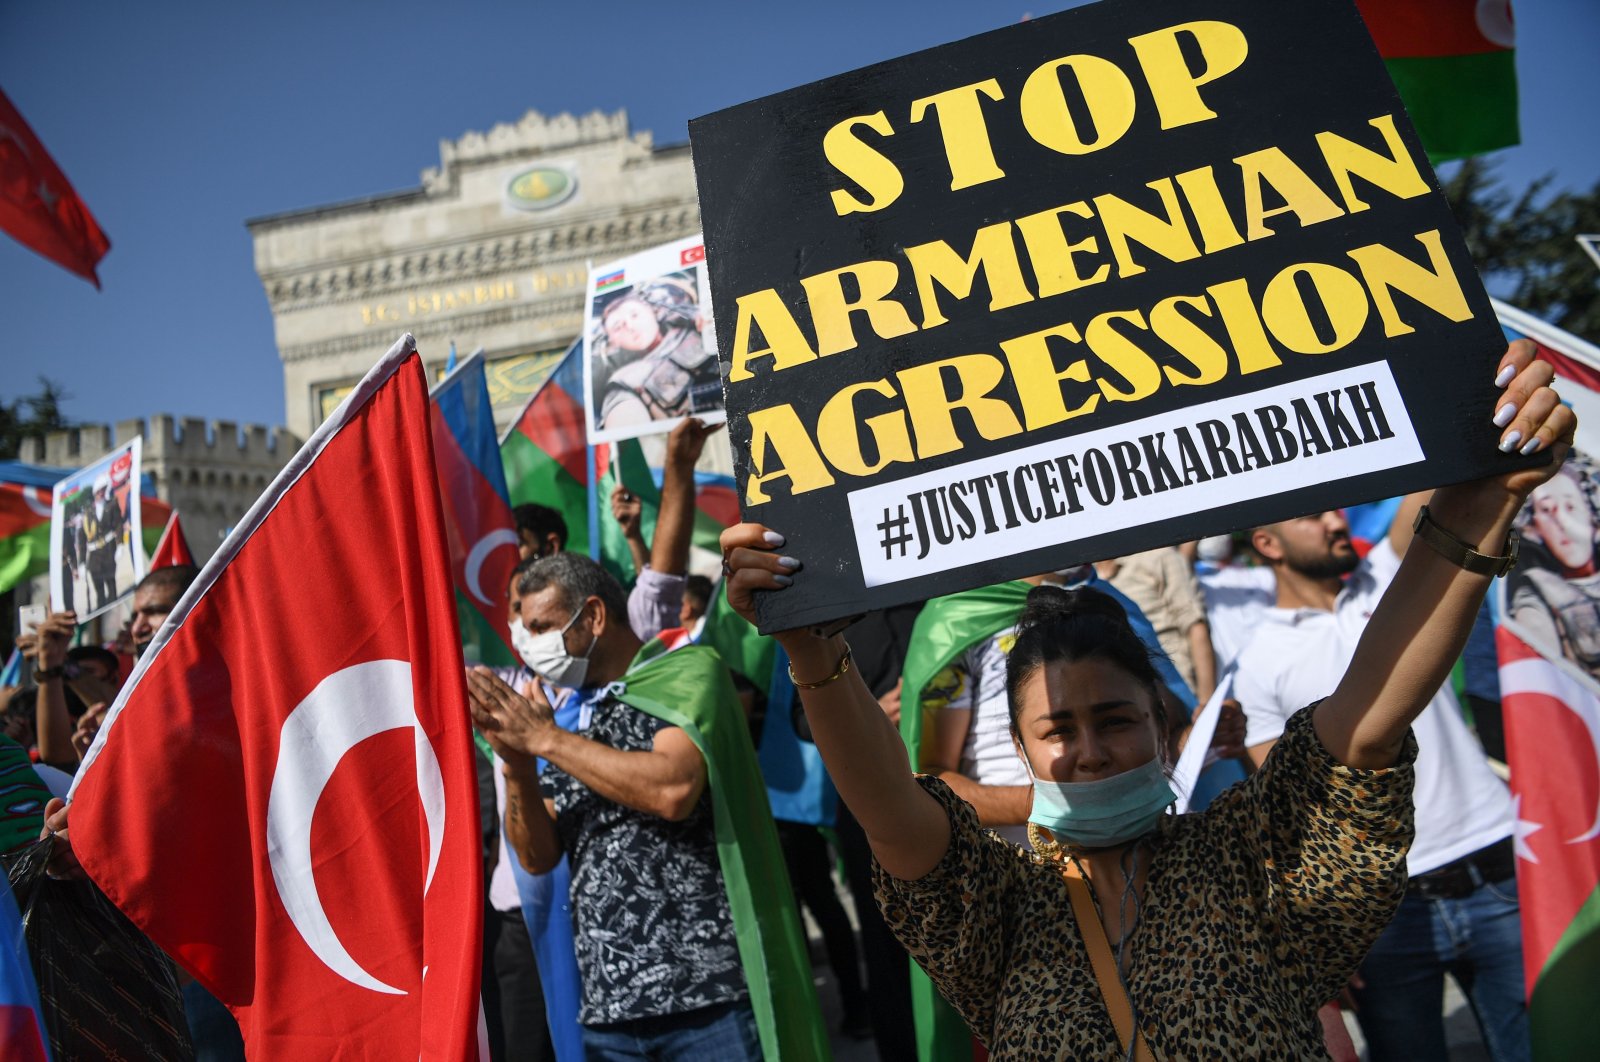 An Azerbaijani protester holds up a sign as she takes part in a demonstration in Istanbul, Turkey, Oct. 4, 2020. (AFP Photo)